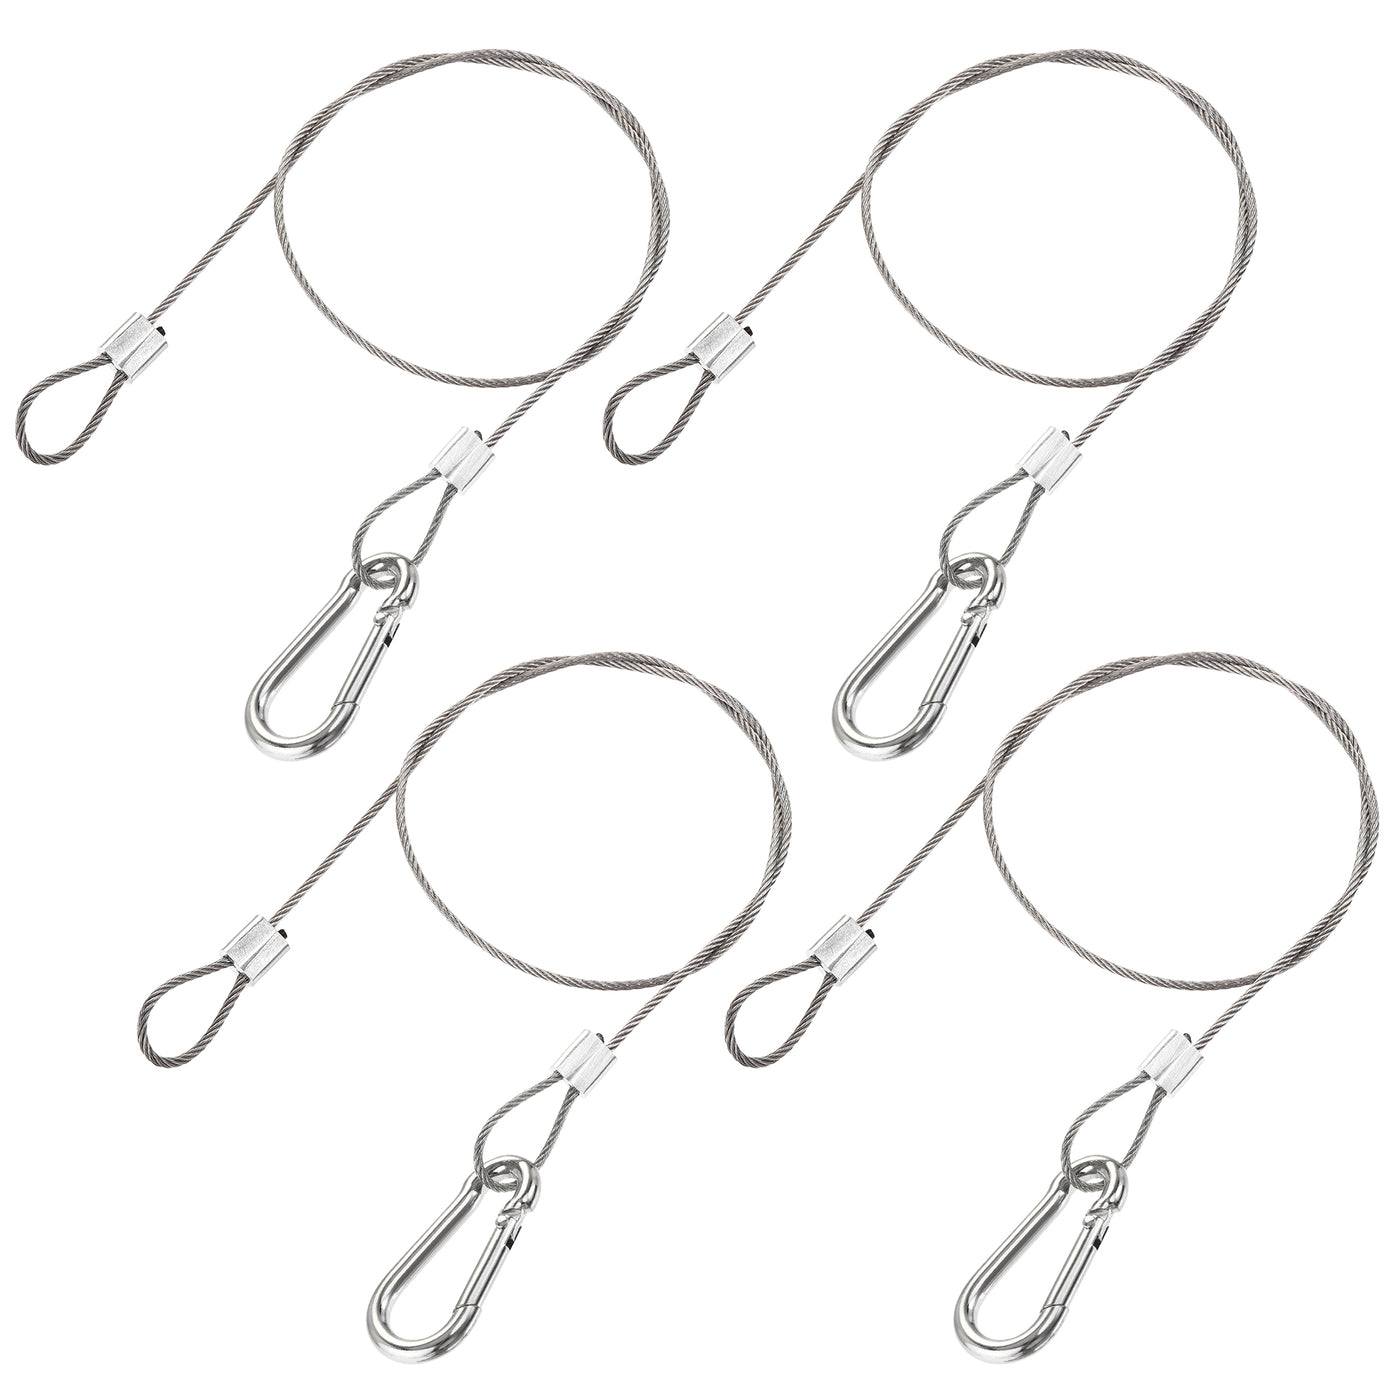 uxcell Uxcell Picture Hanging Wire Kit, 4Set 0.5M Loop and Hook Hanging Wire for Home Picture Art Gallery Picture Display Kit, Load 66 lbs